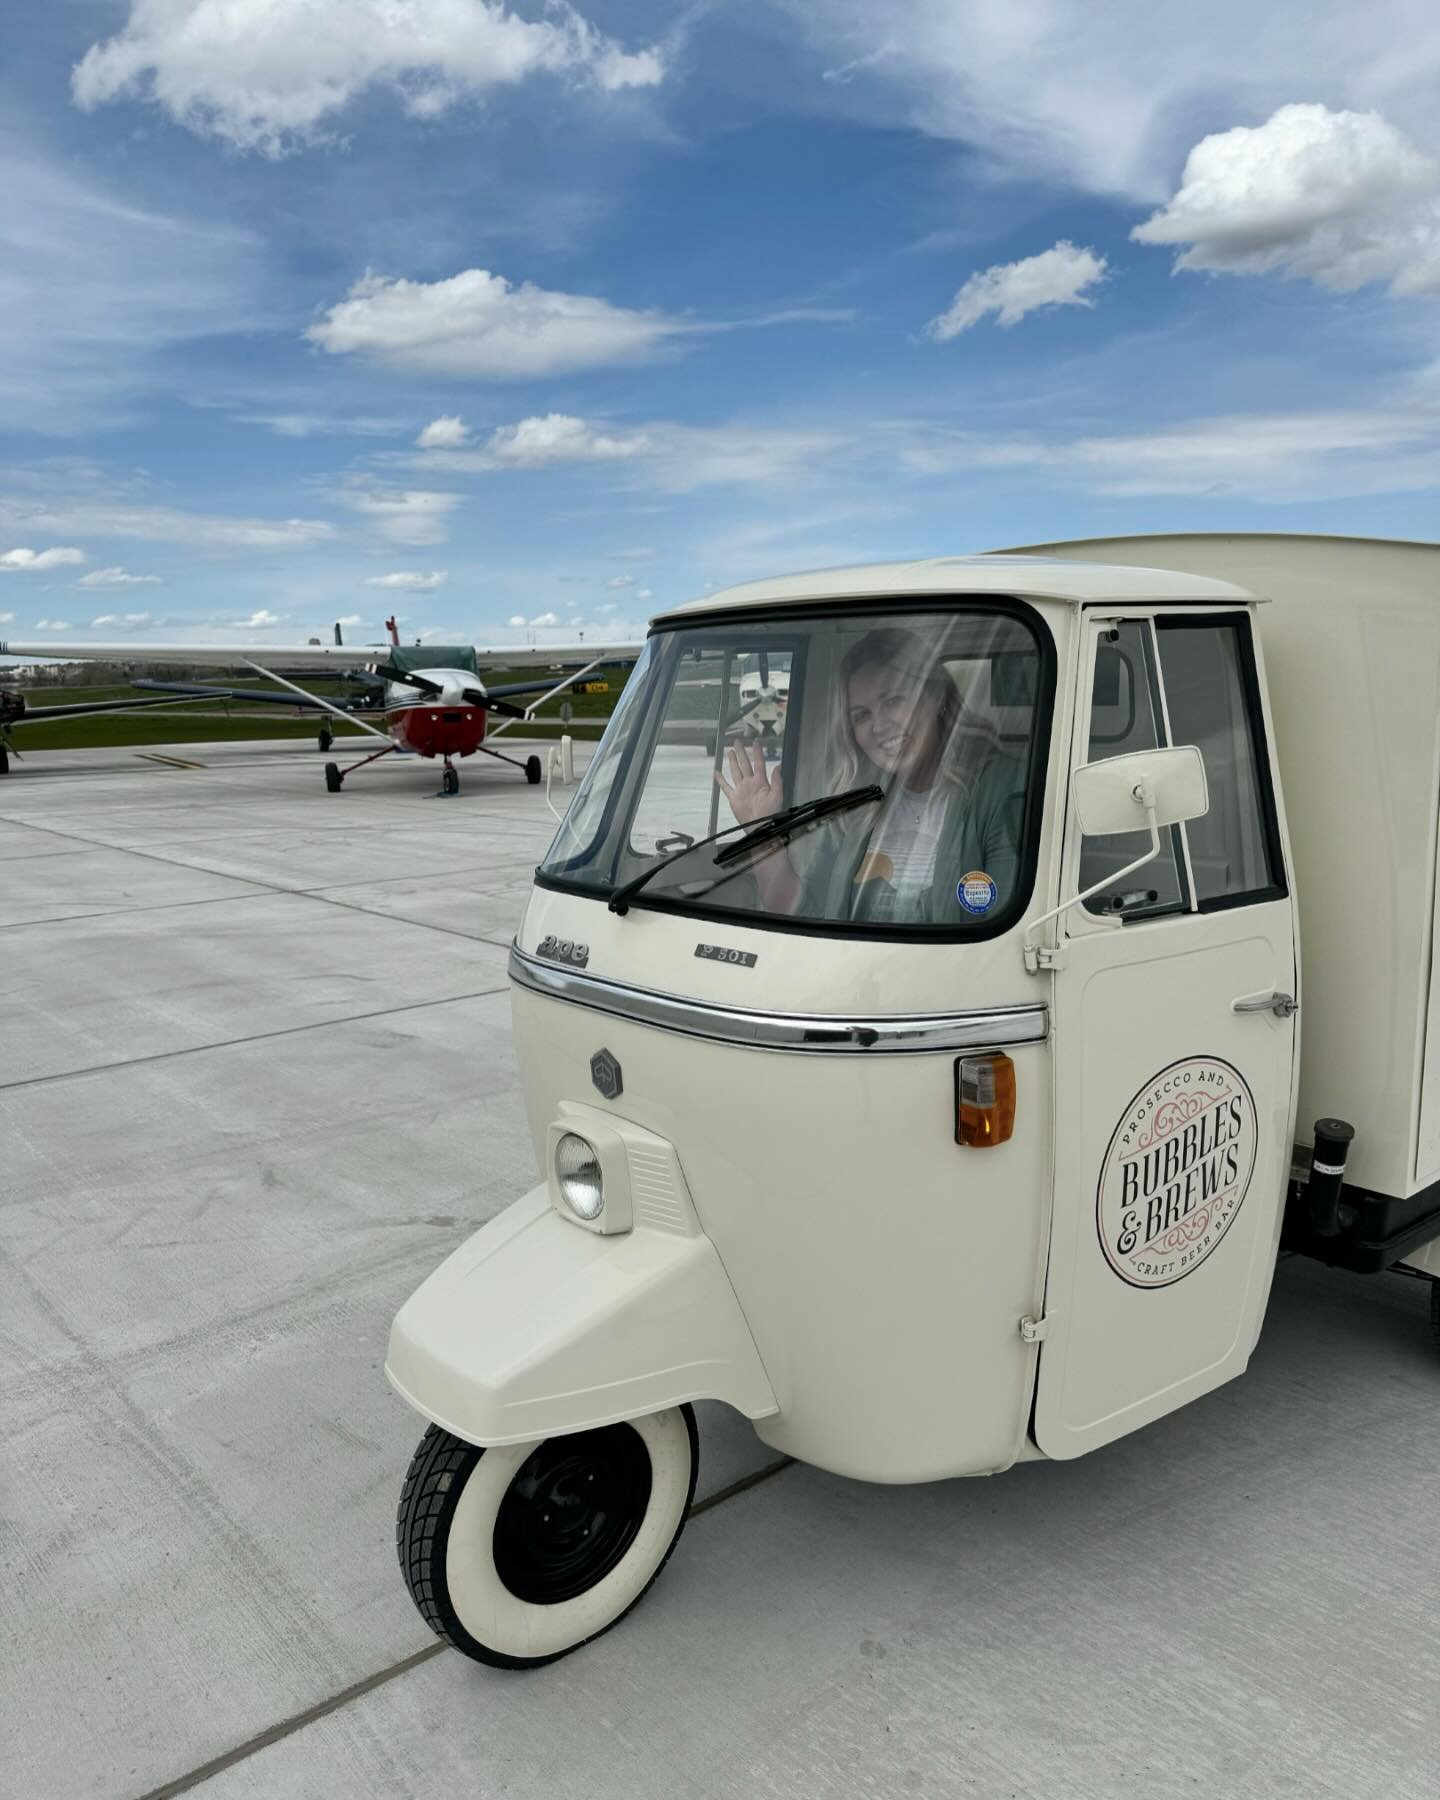 Pearl the Piaggio hit the runway this week - the @bismarckmunicipalairport runway! 

Thank you @bismarckaerocenter for inviting us to serve at the Grand Opening of your new hanger! We were honored to serve you and your guests. What a cool event ✈️ 😊